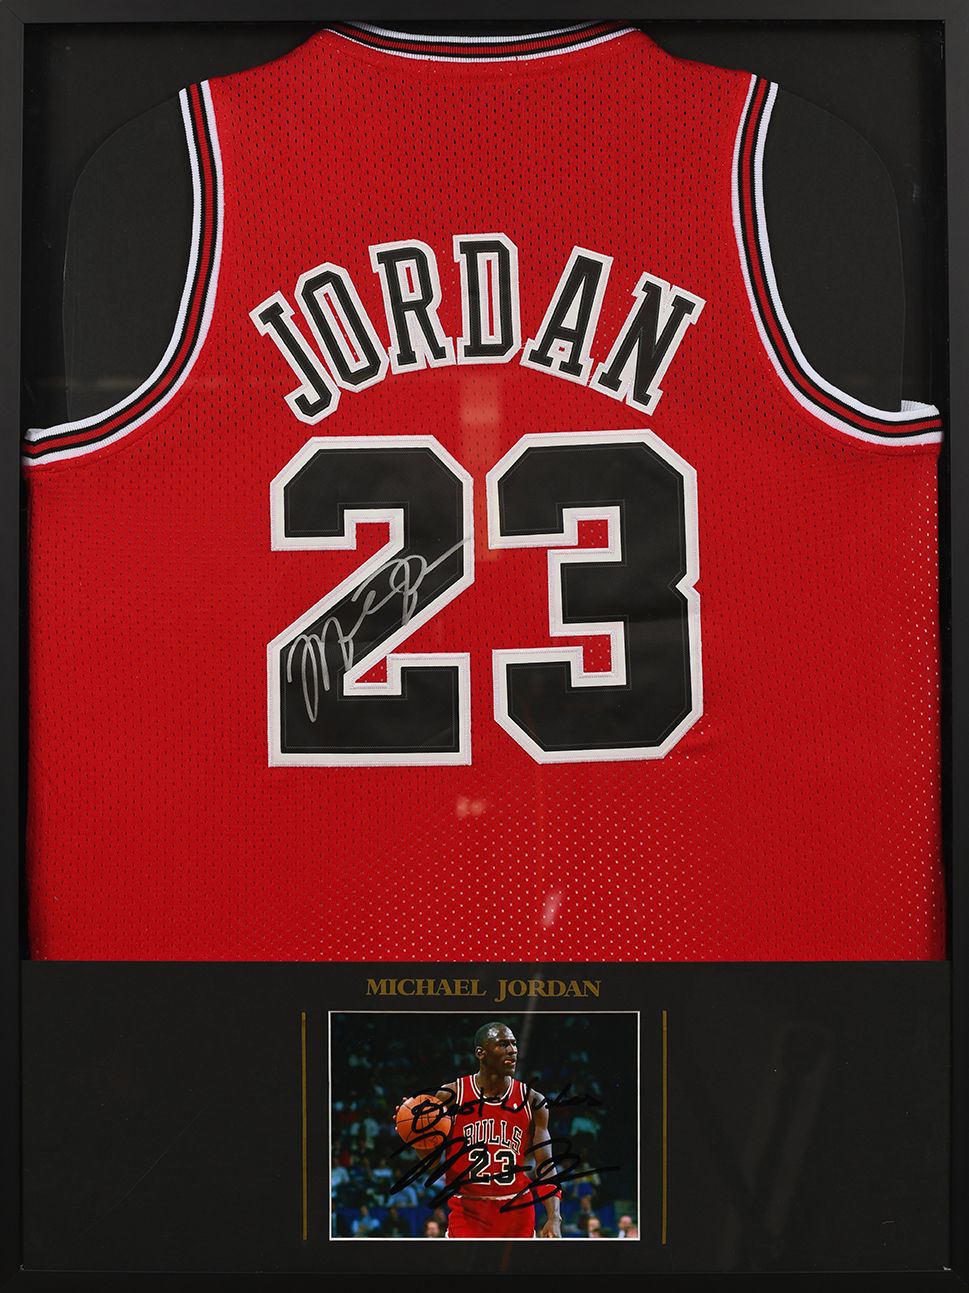 Null Michael Jordan. Autographed jersey (replica) and photo by the player under &hellip;